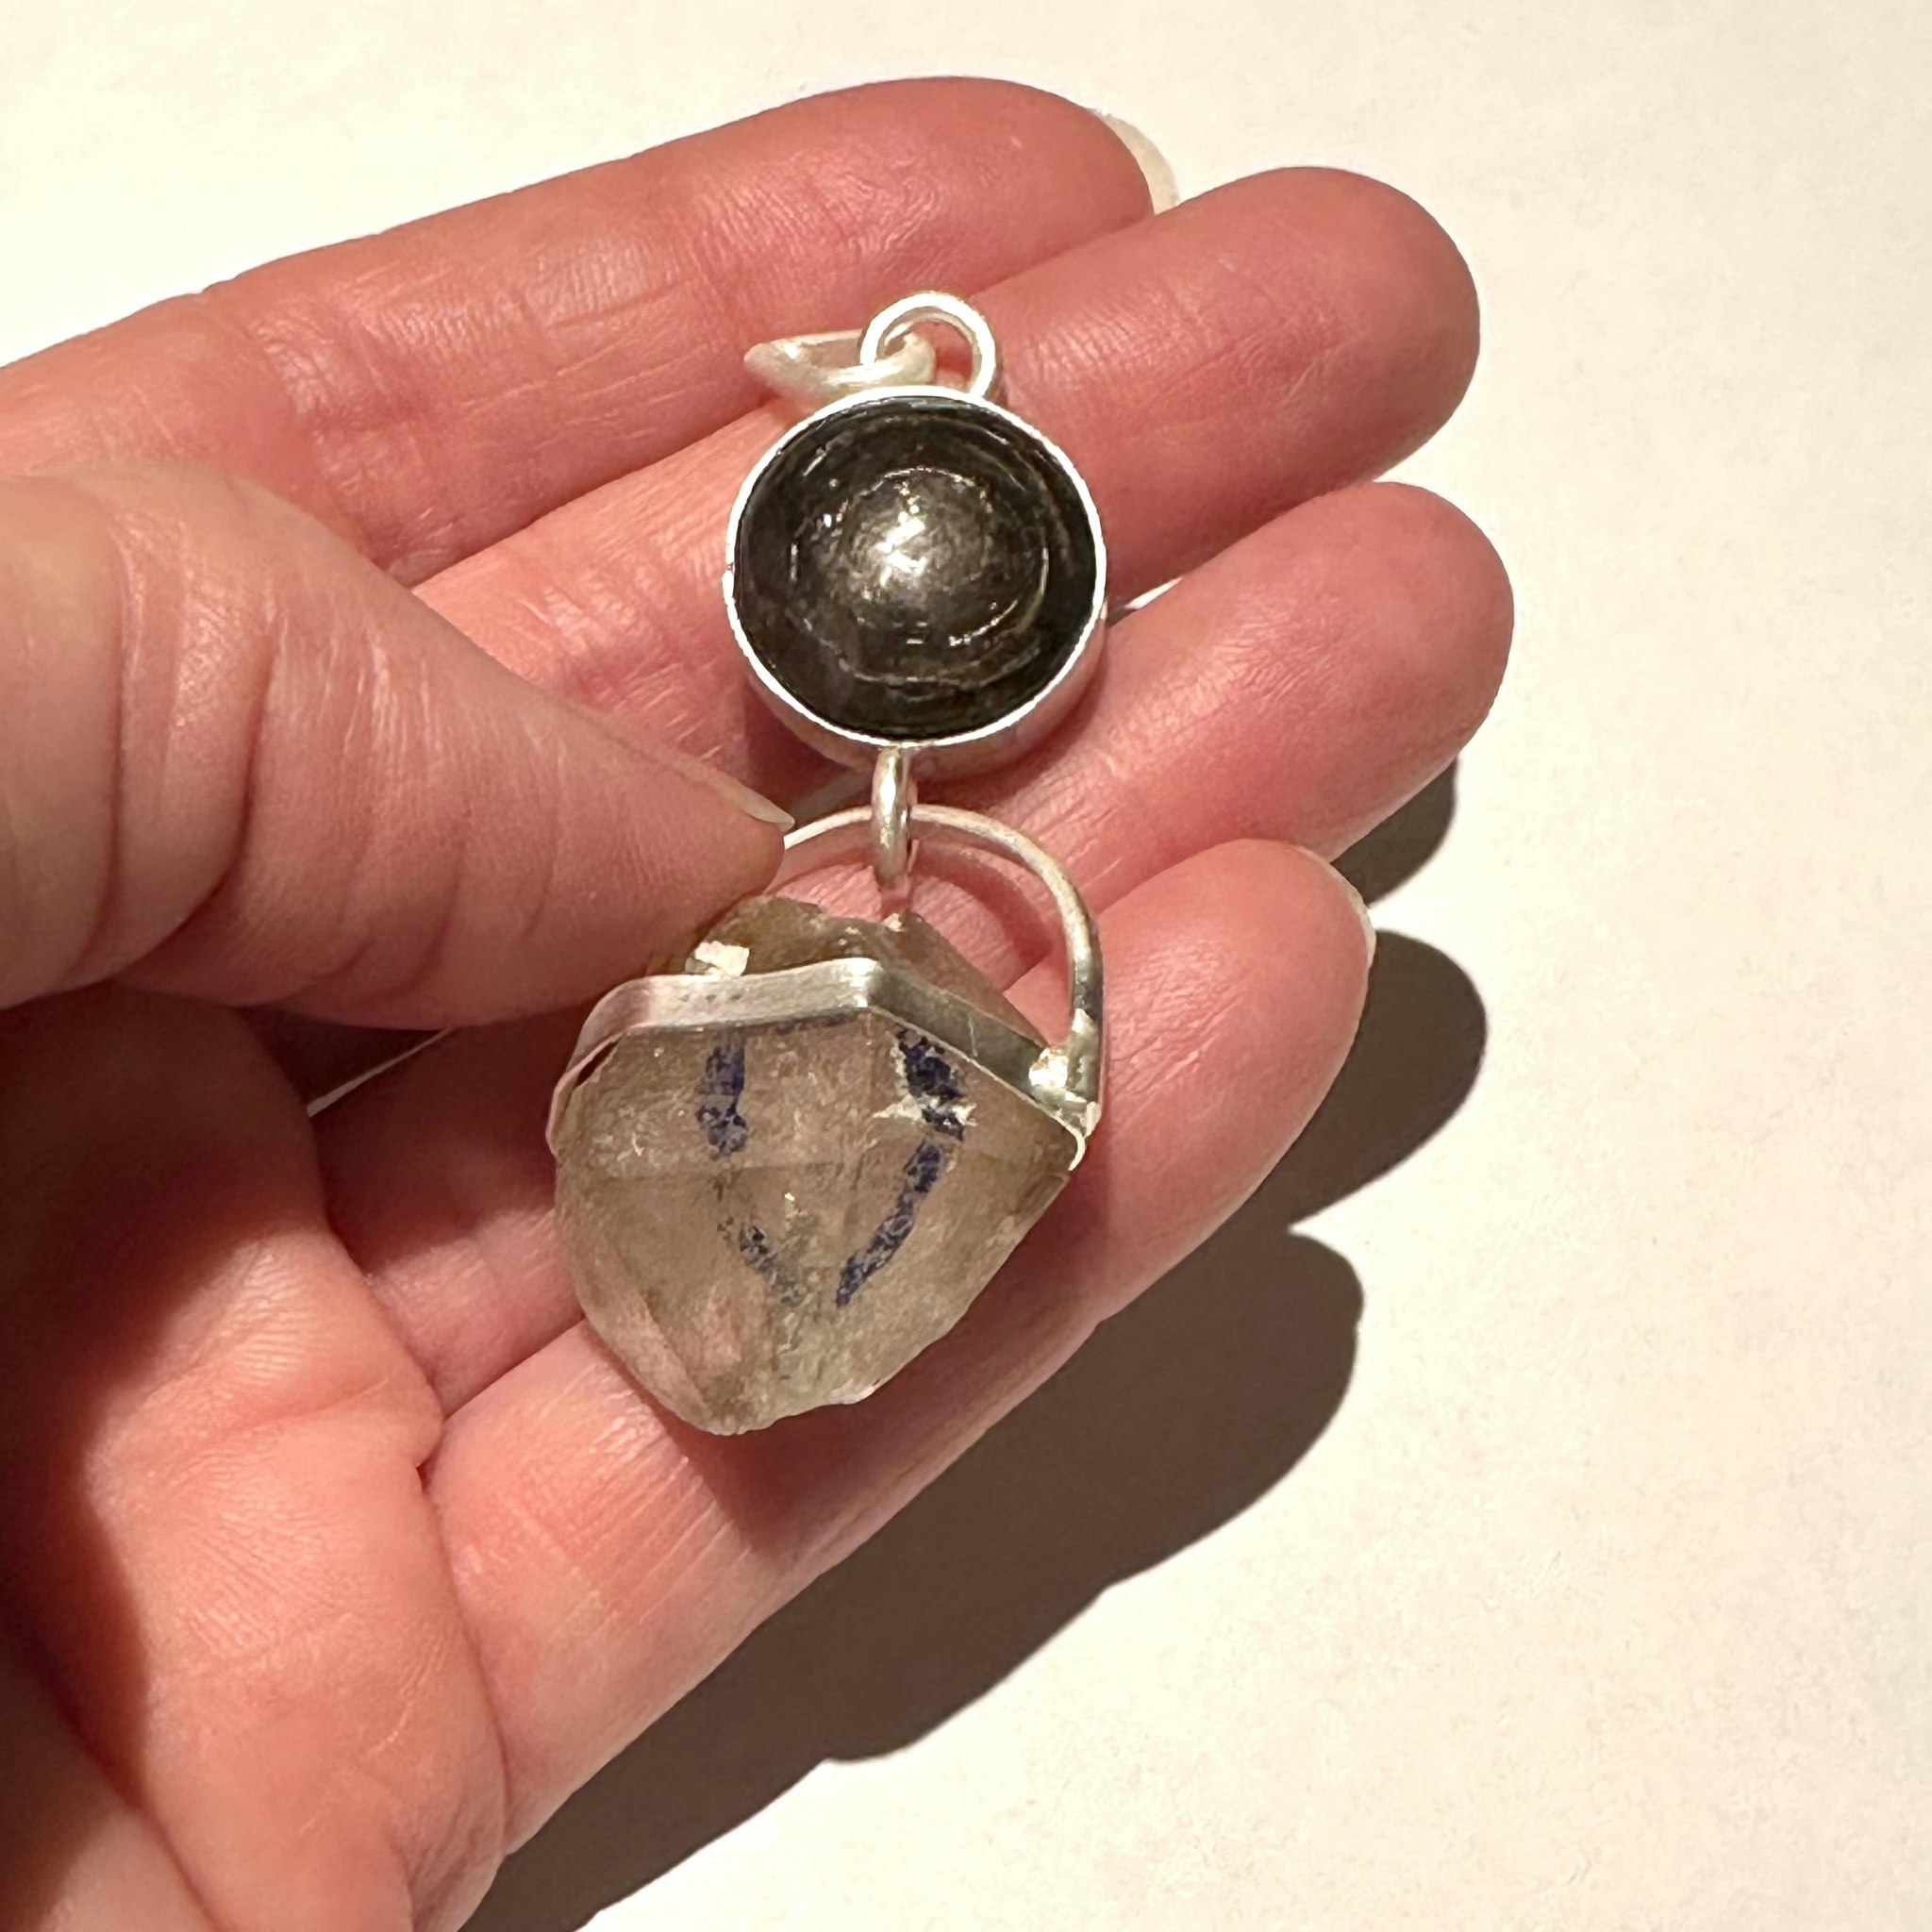 Black star Star sapphire with double terminated rock crystal with Enhydro from the Himalayas